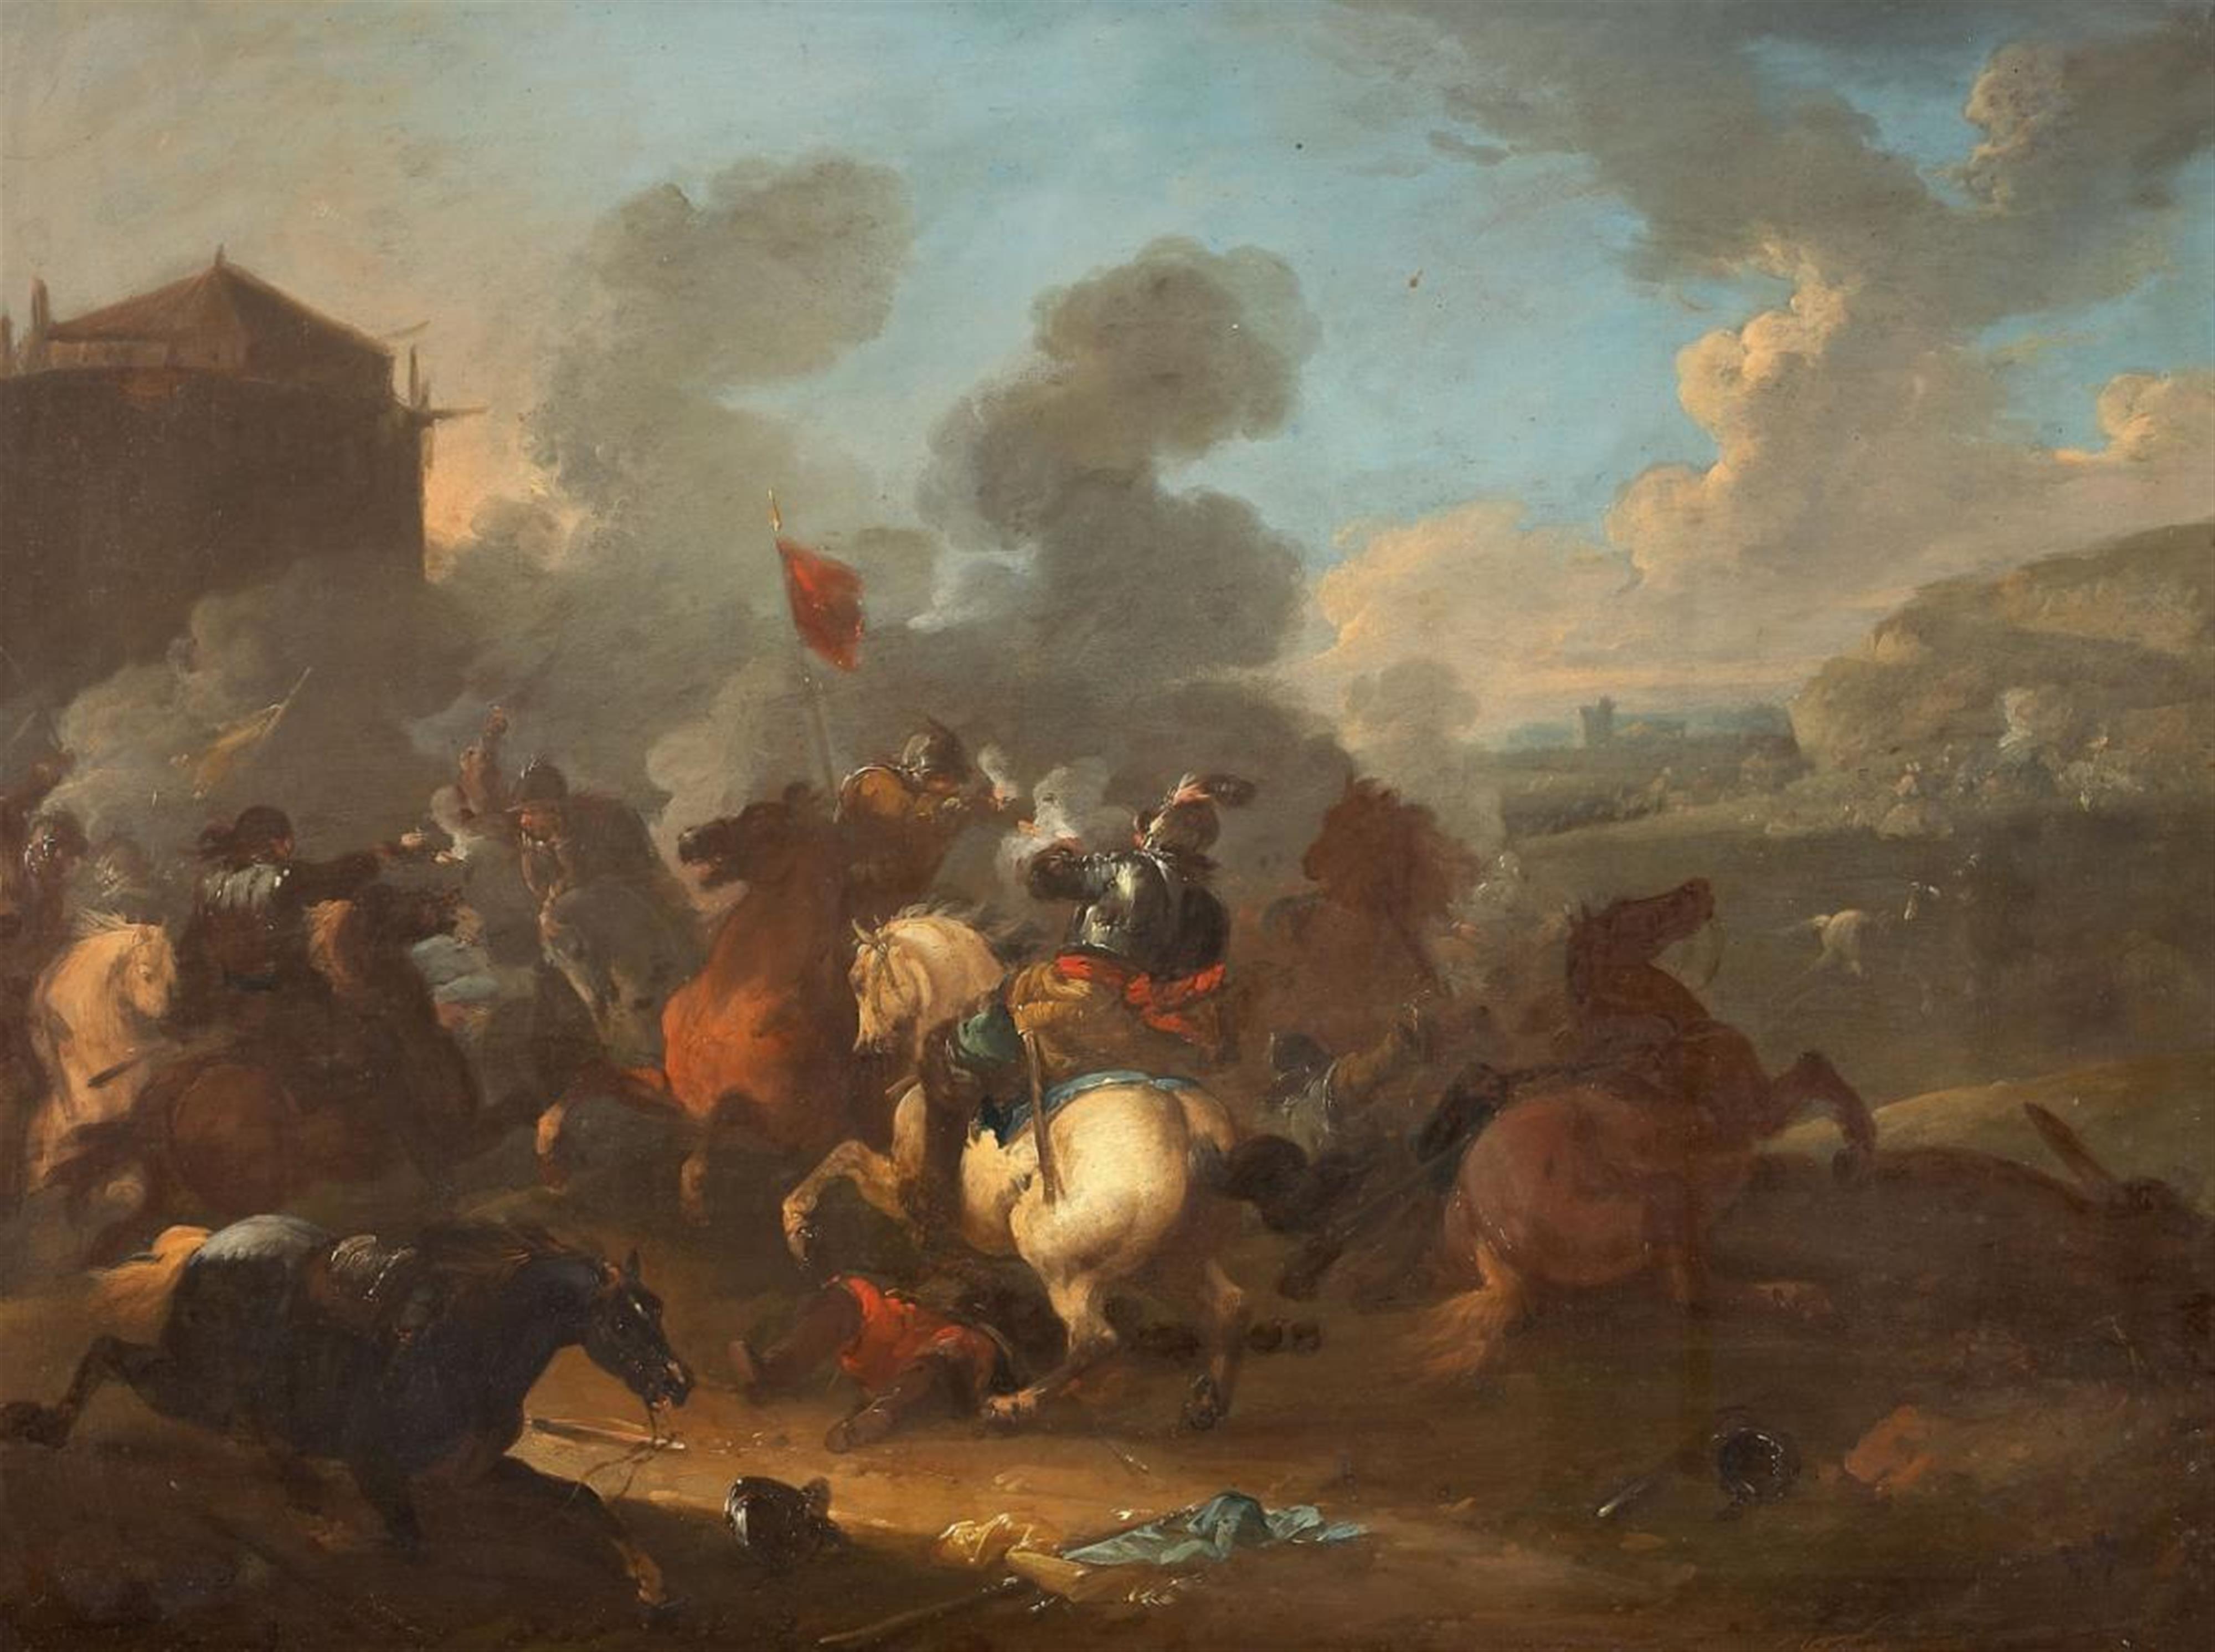 Jacques Courtois, called Le Bourguignon, attributed to - LANDSCAPE WITH CAVALRY BATTLE